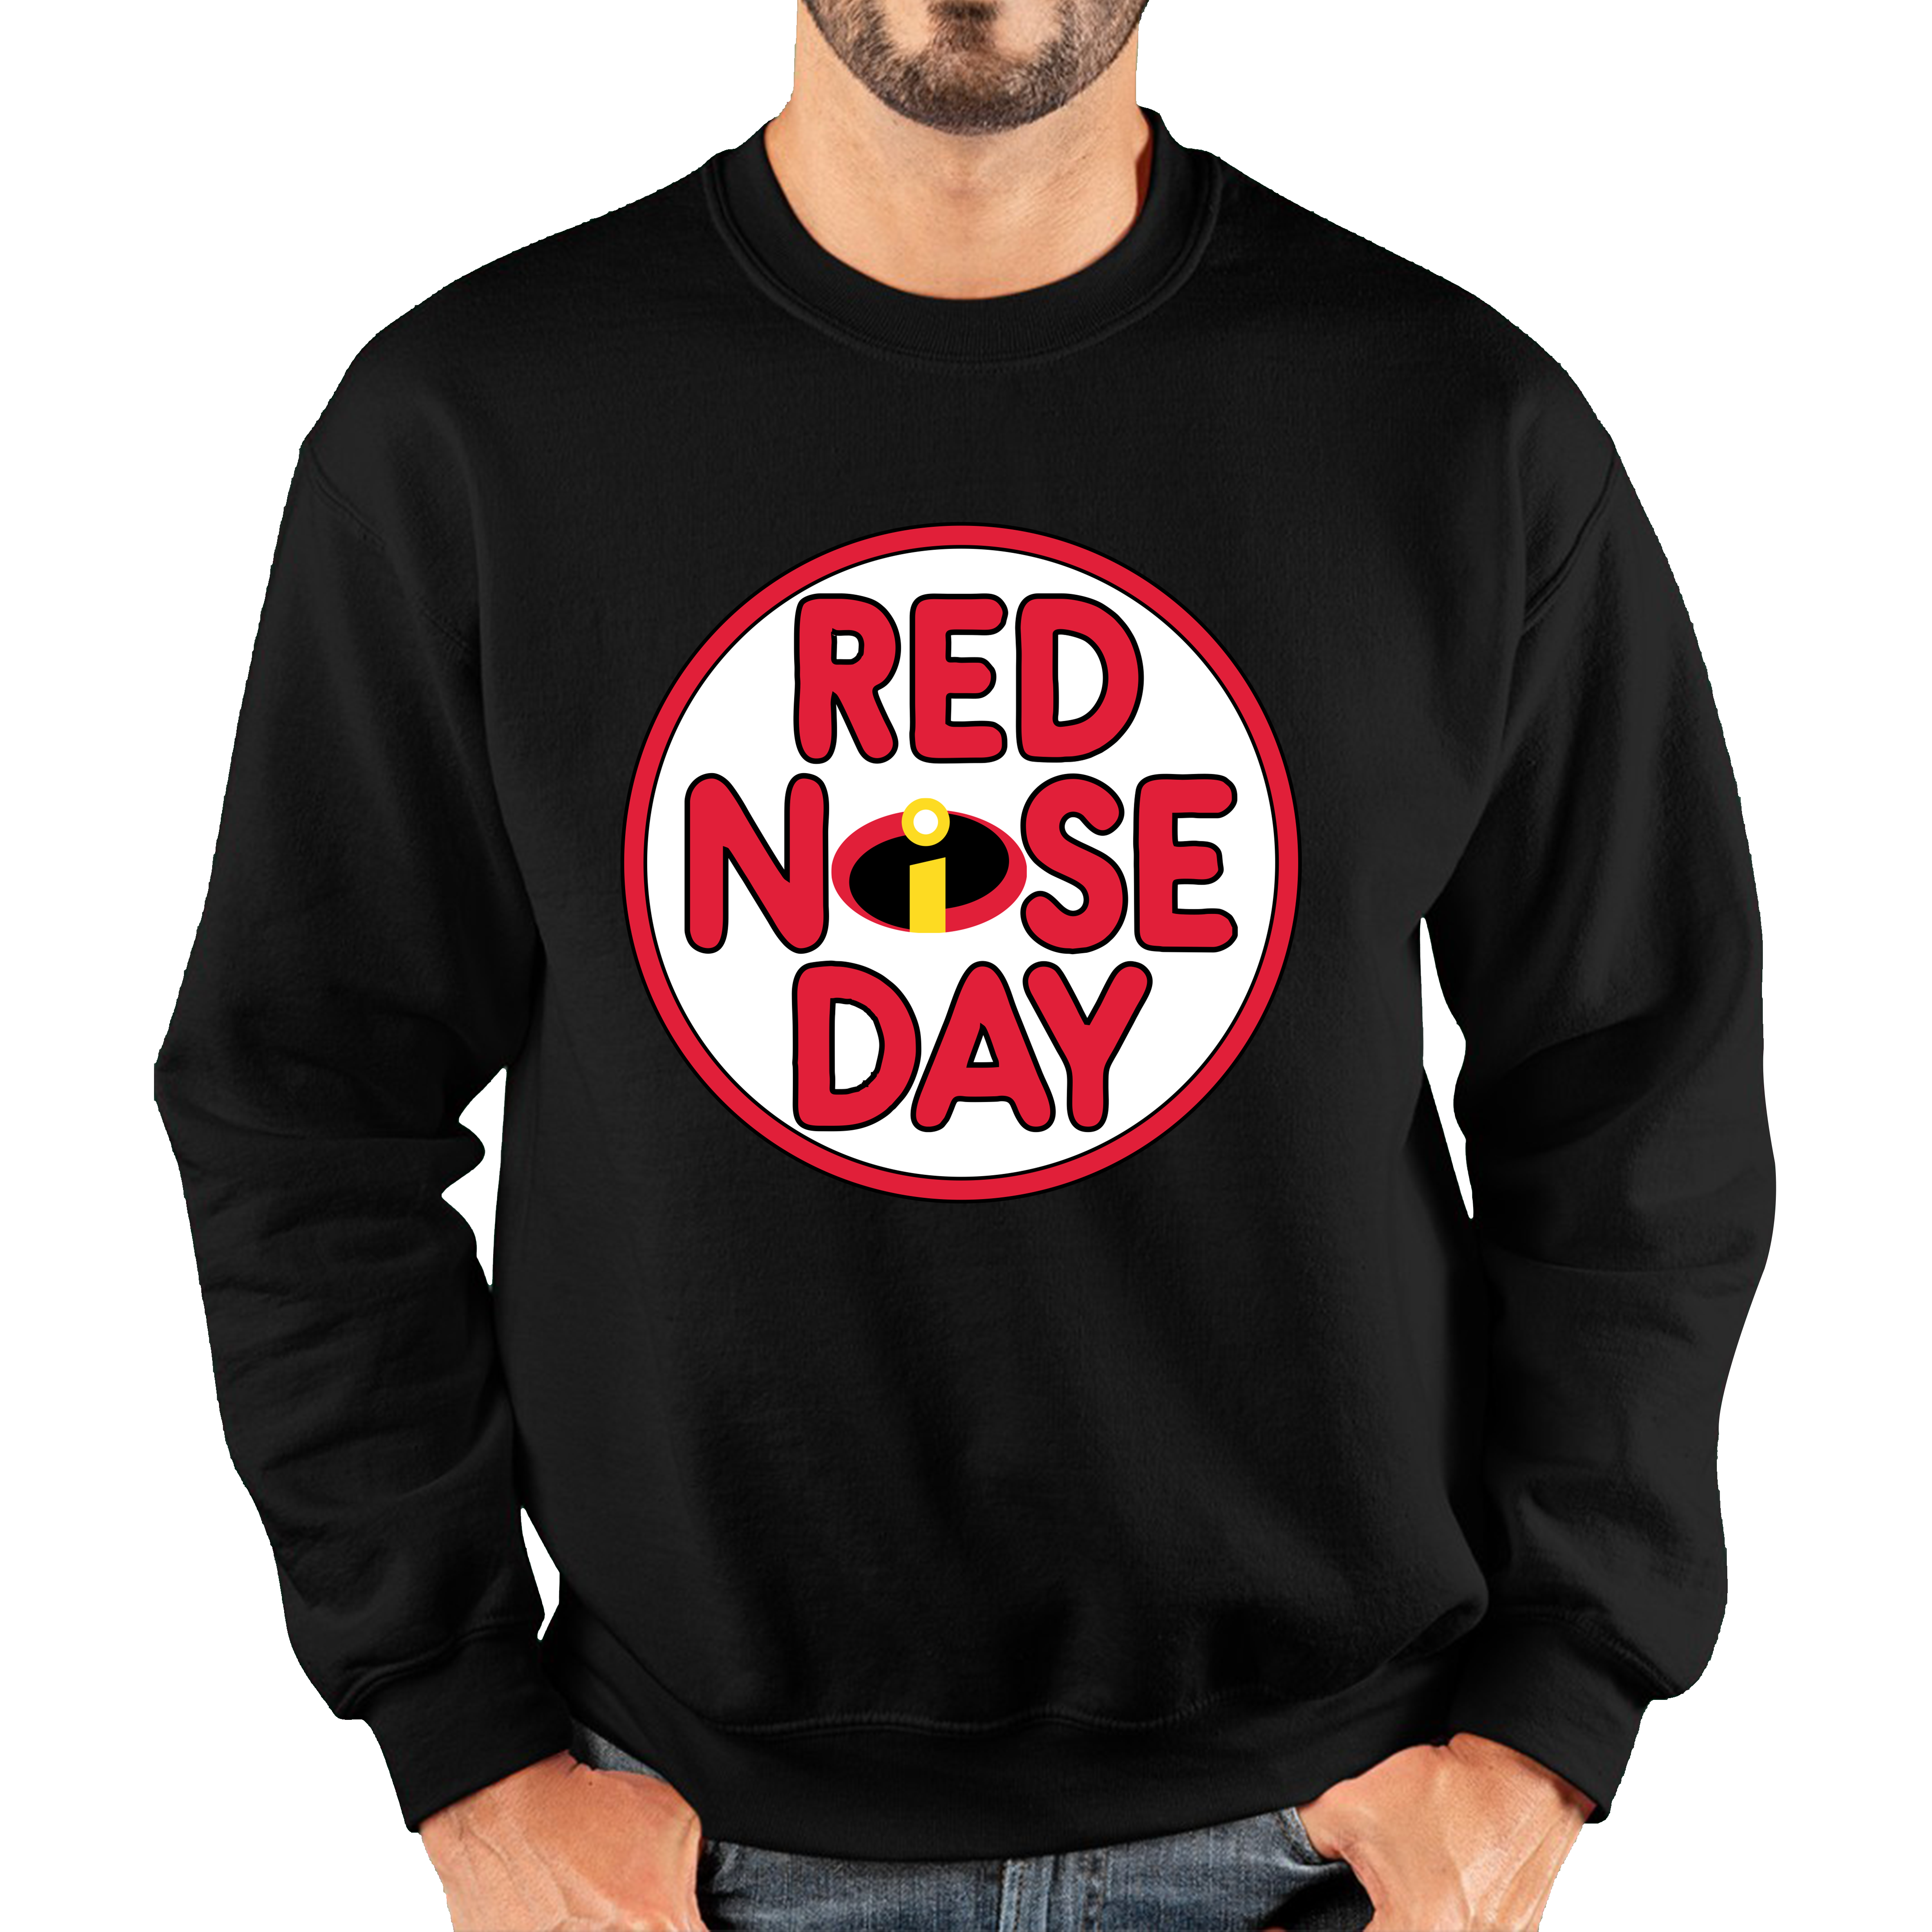 Disney The Incredibles Red Nose Day Adult Sweatshirt. 50% Goes To Charity